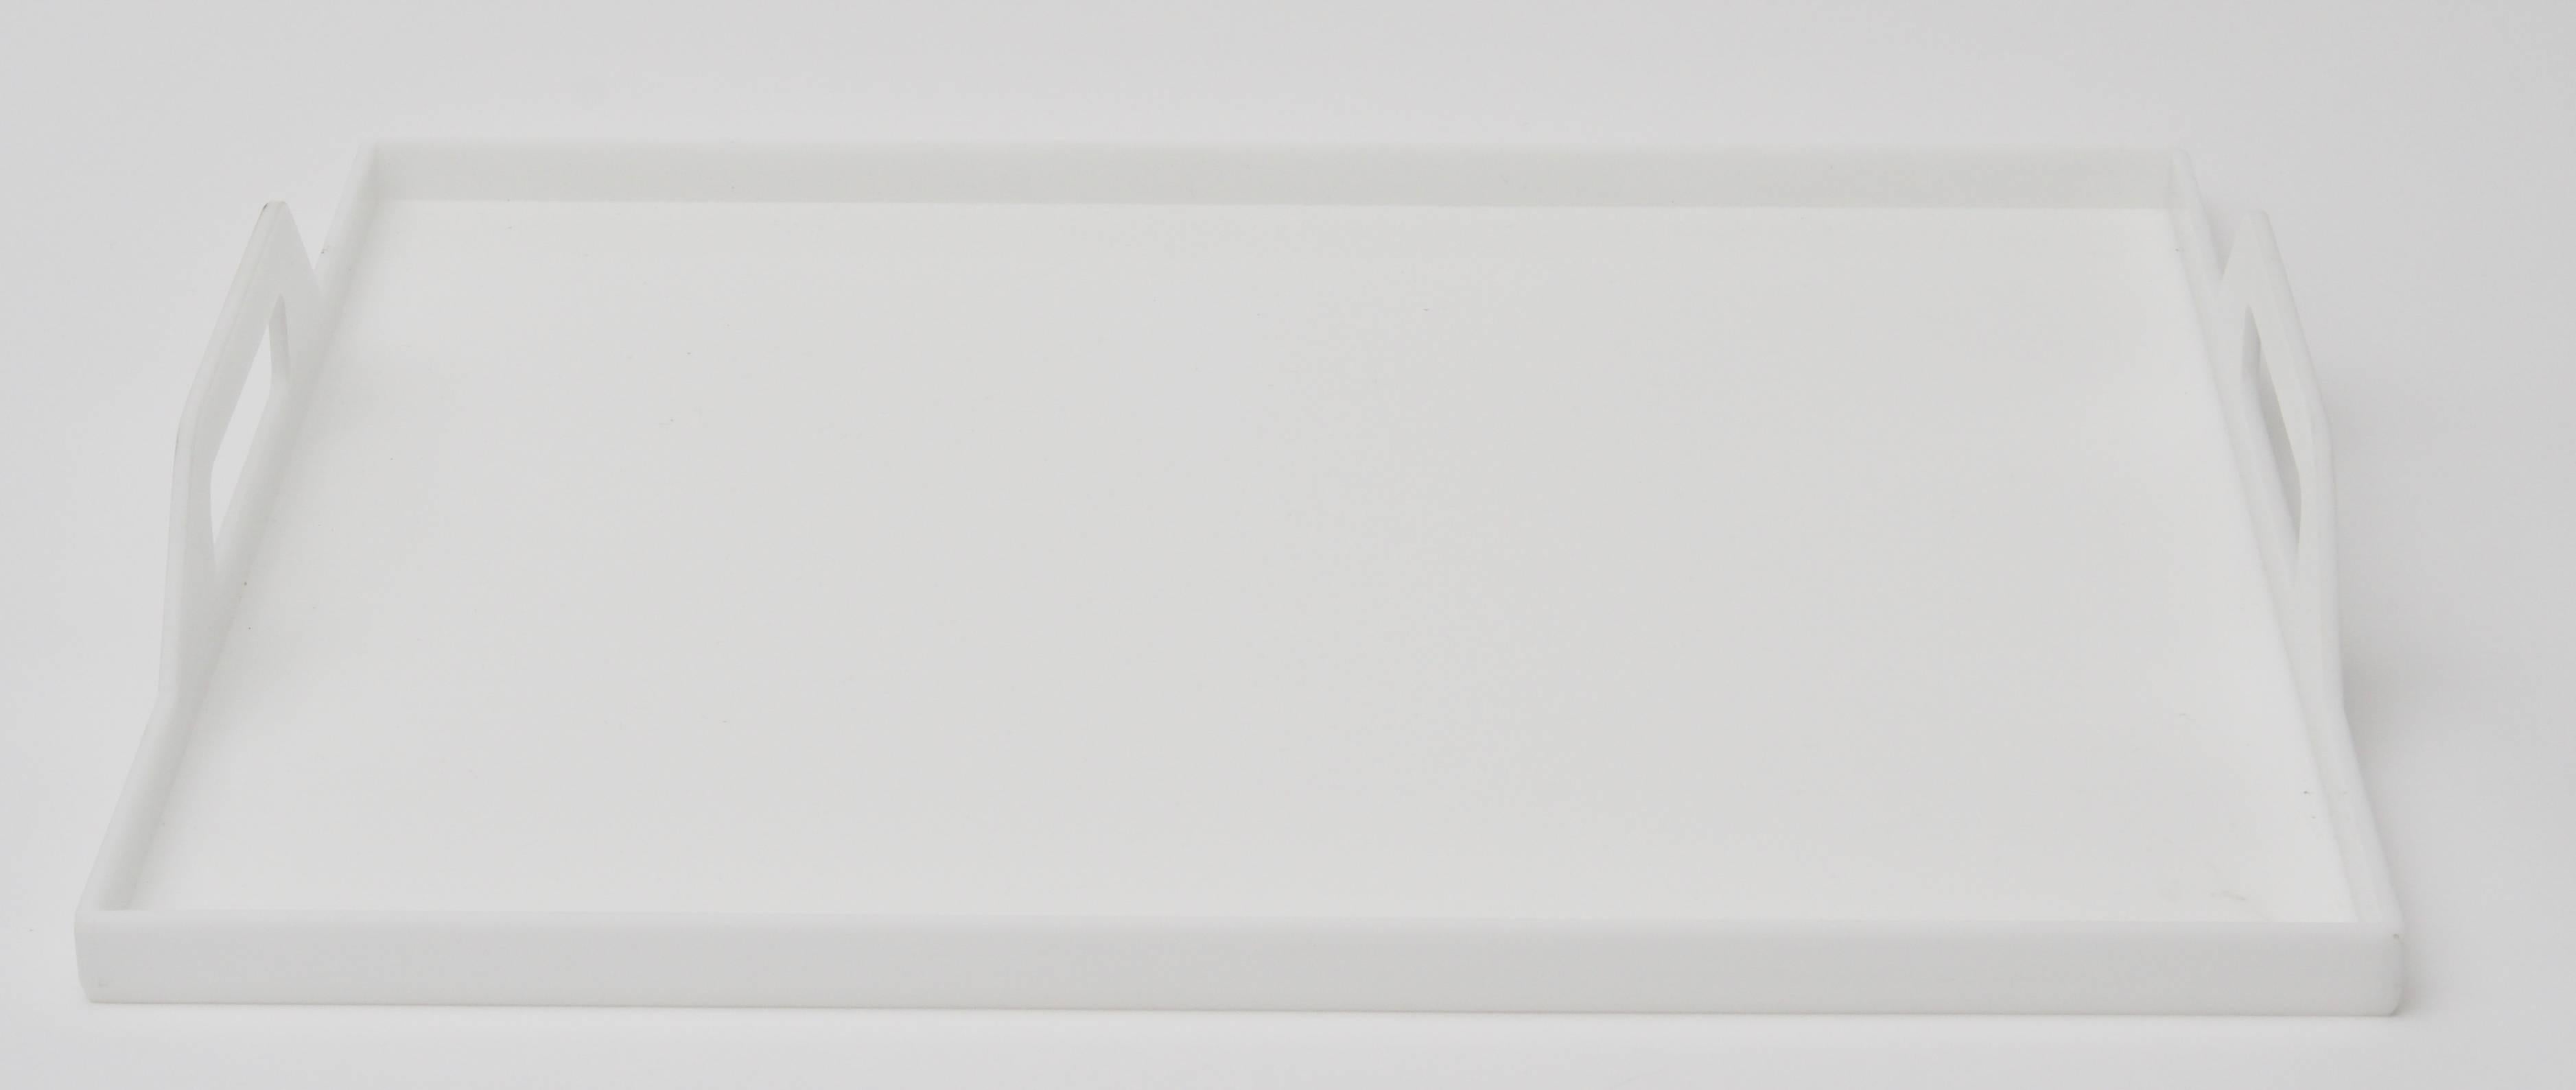 Hand-Crafted White Lucite Breakfast Tray